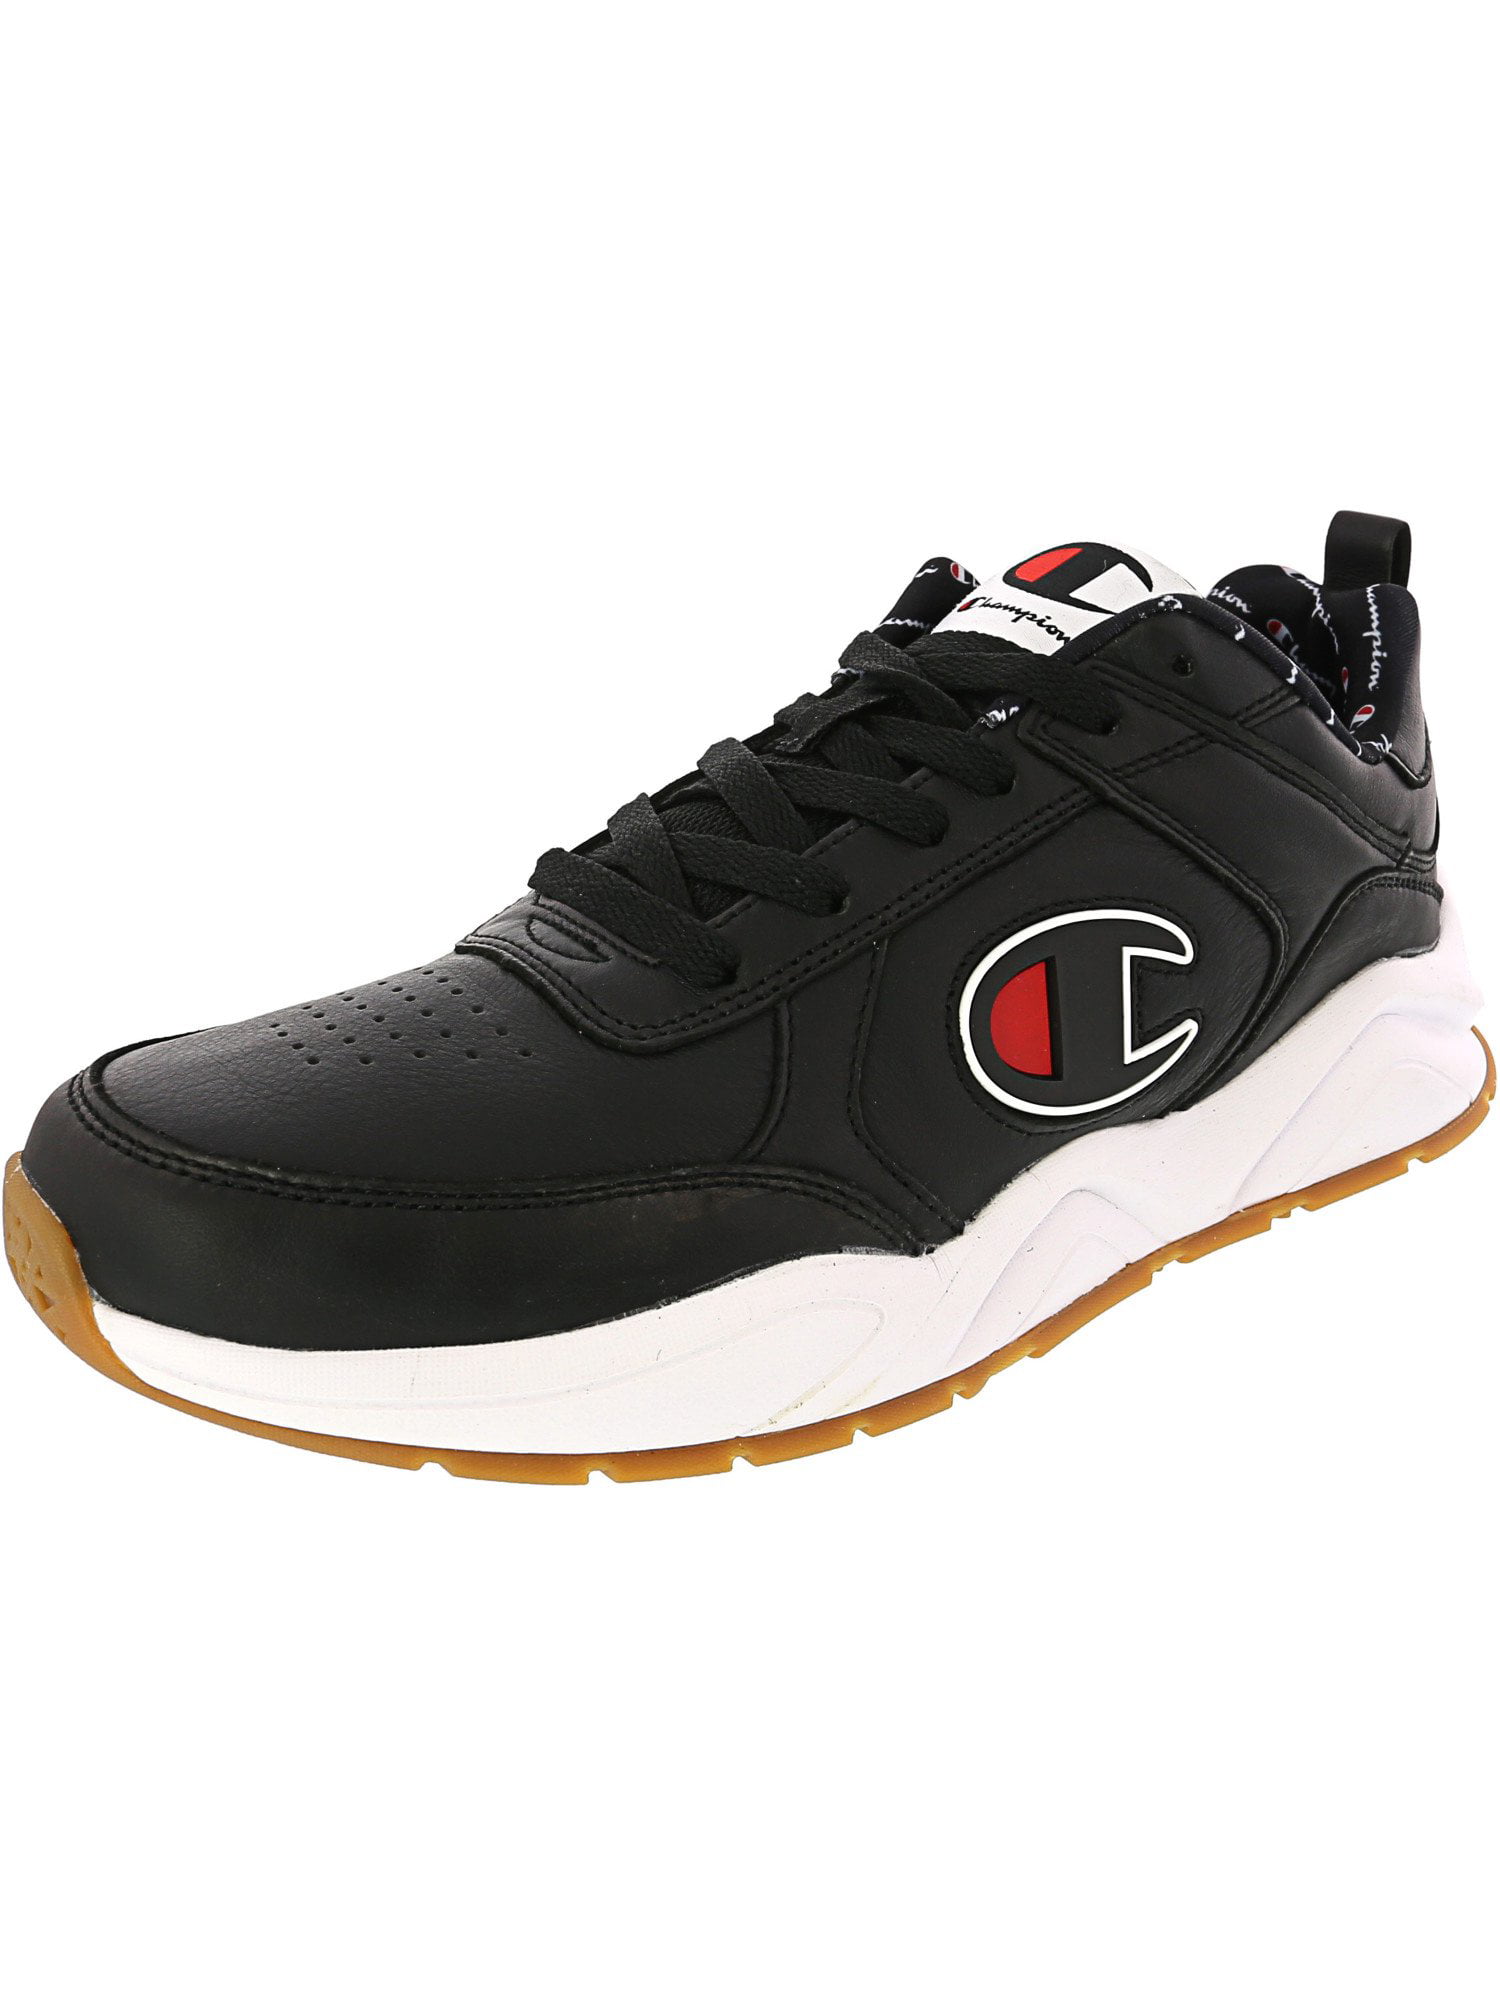 Champion 93 Eighteen Big Mens Black Leather Low Top Lace Up Sneakers Shoes 